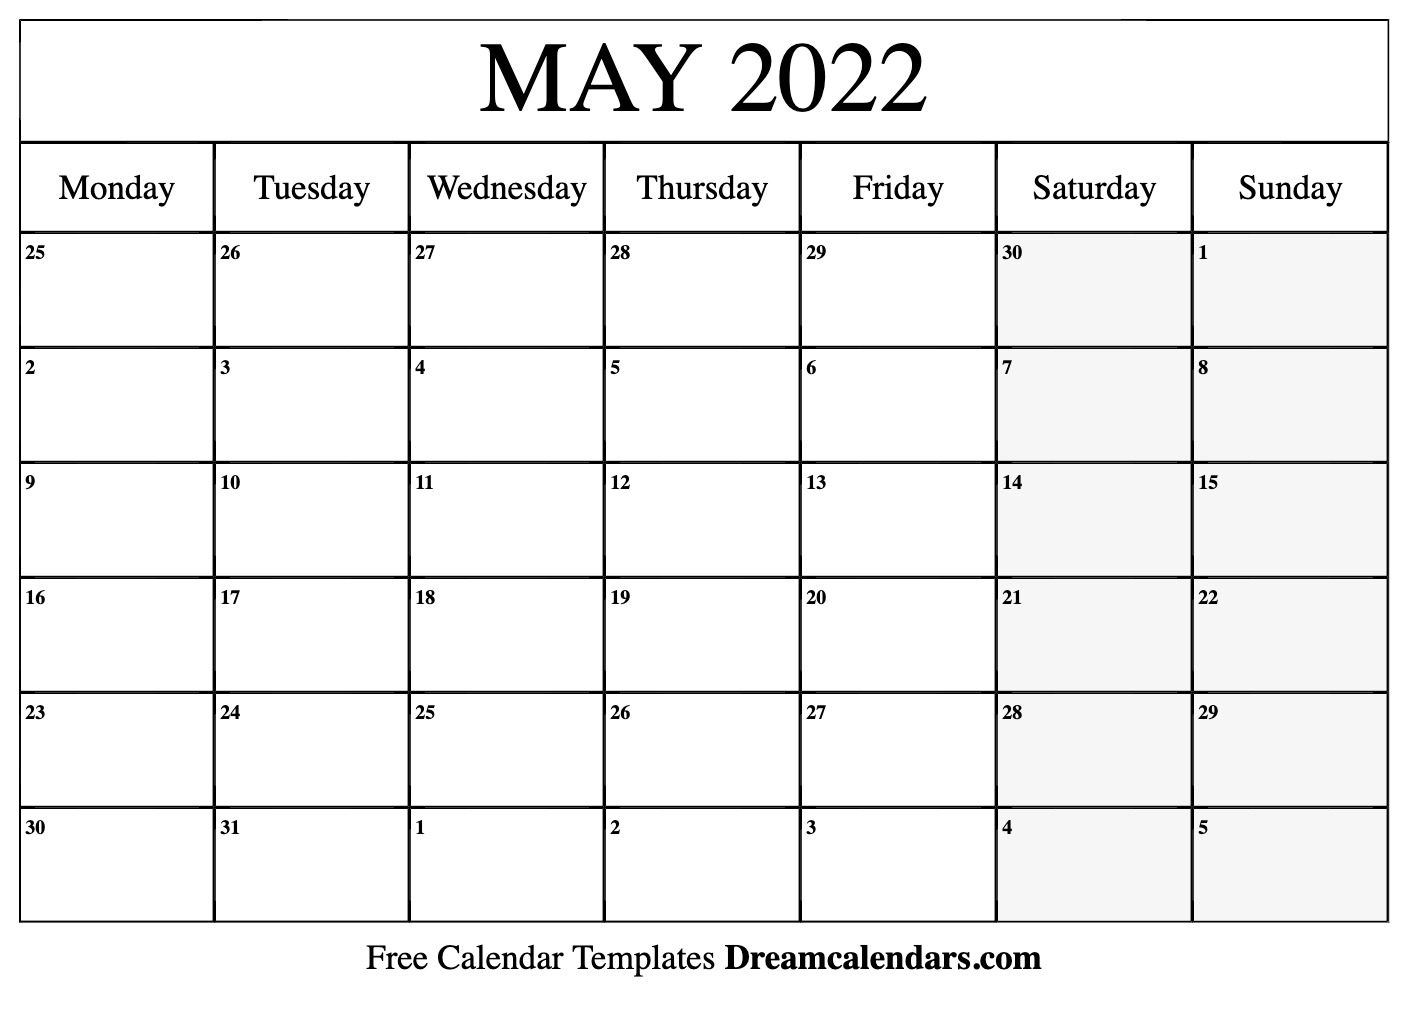 May 2022 Calendar - Free Printable with Holidays and Observances